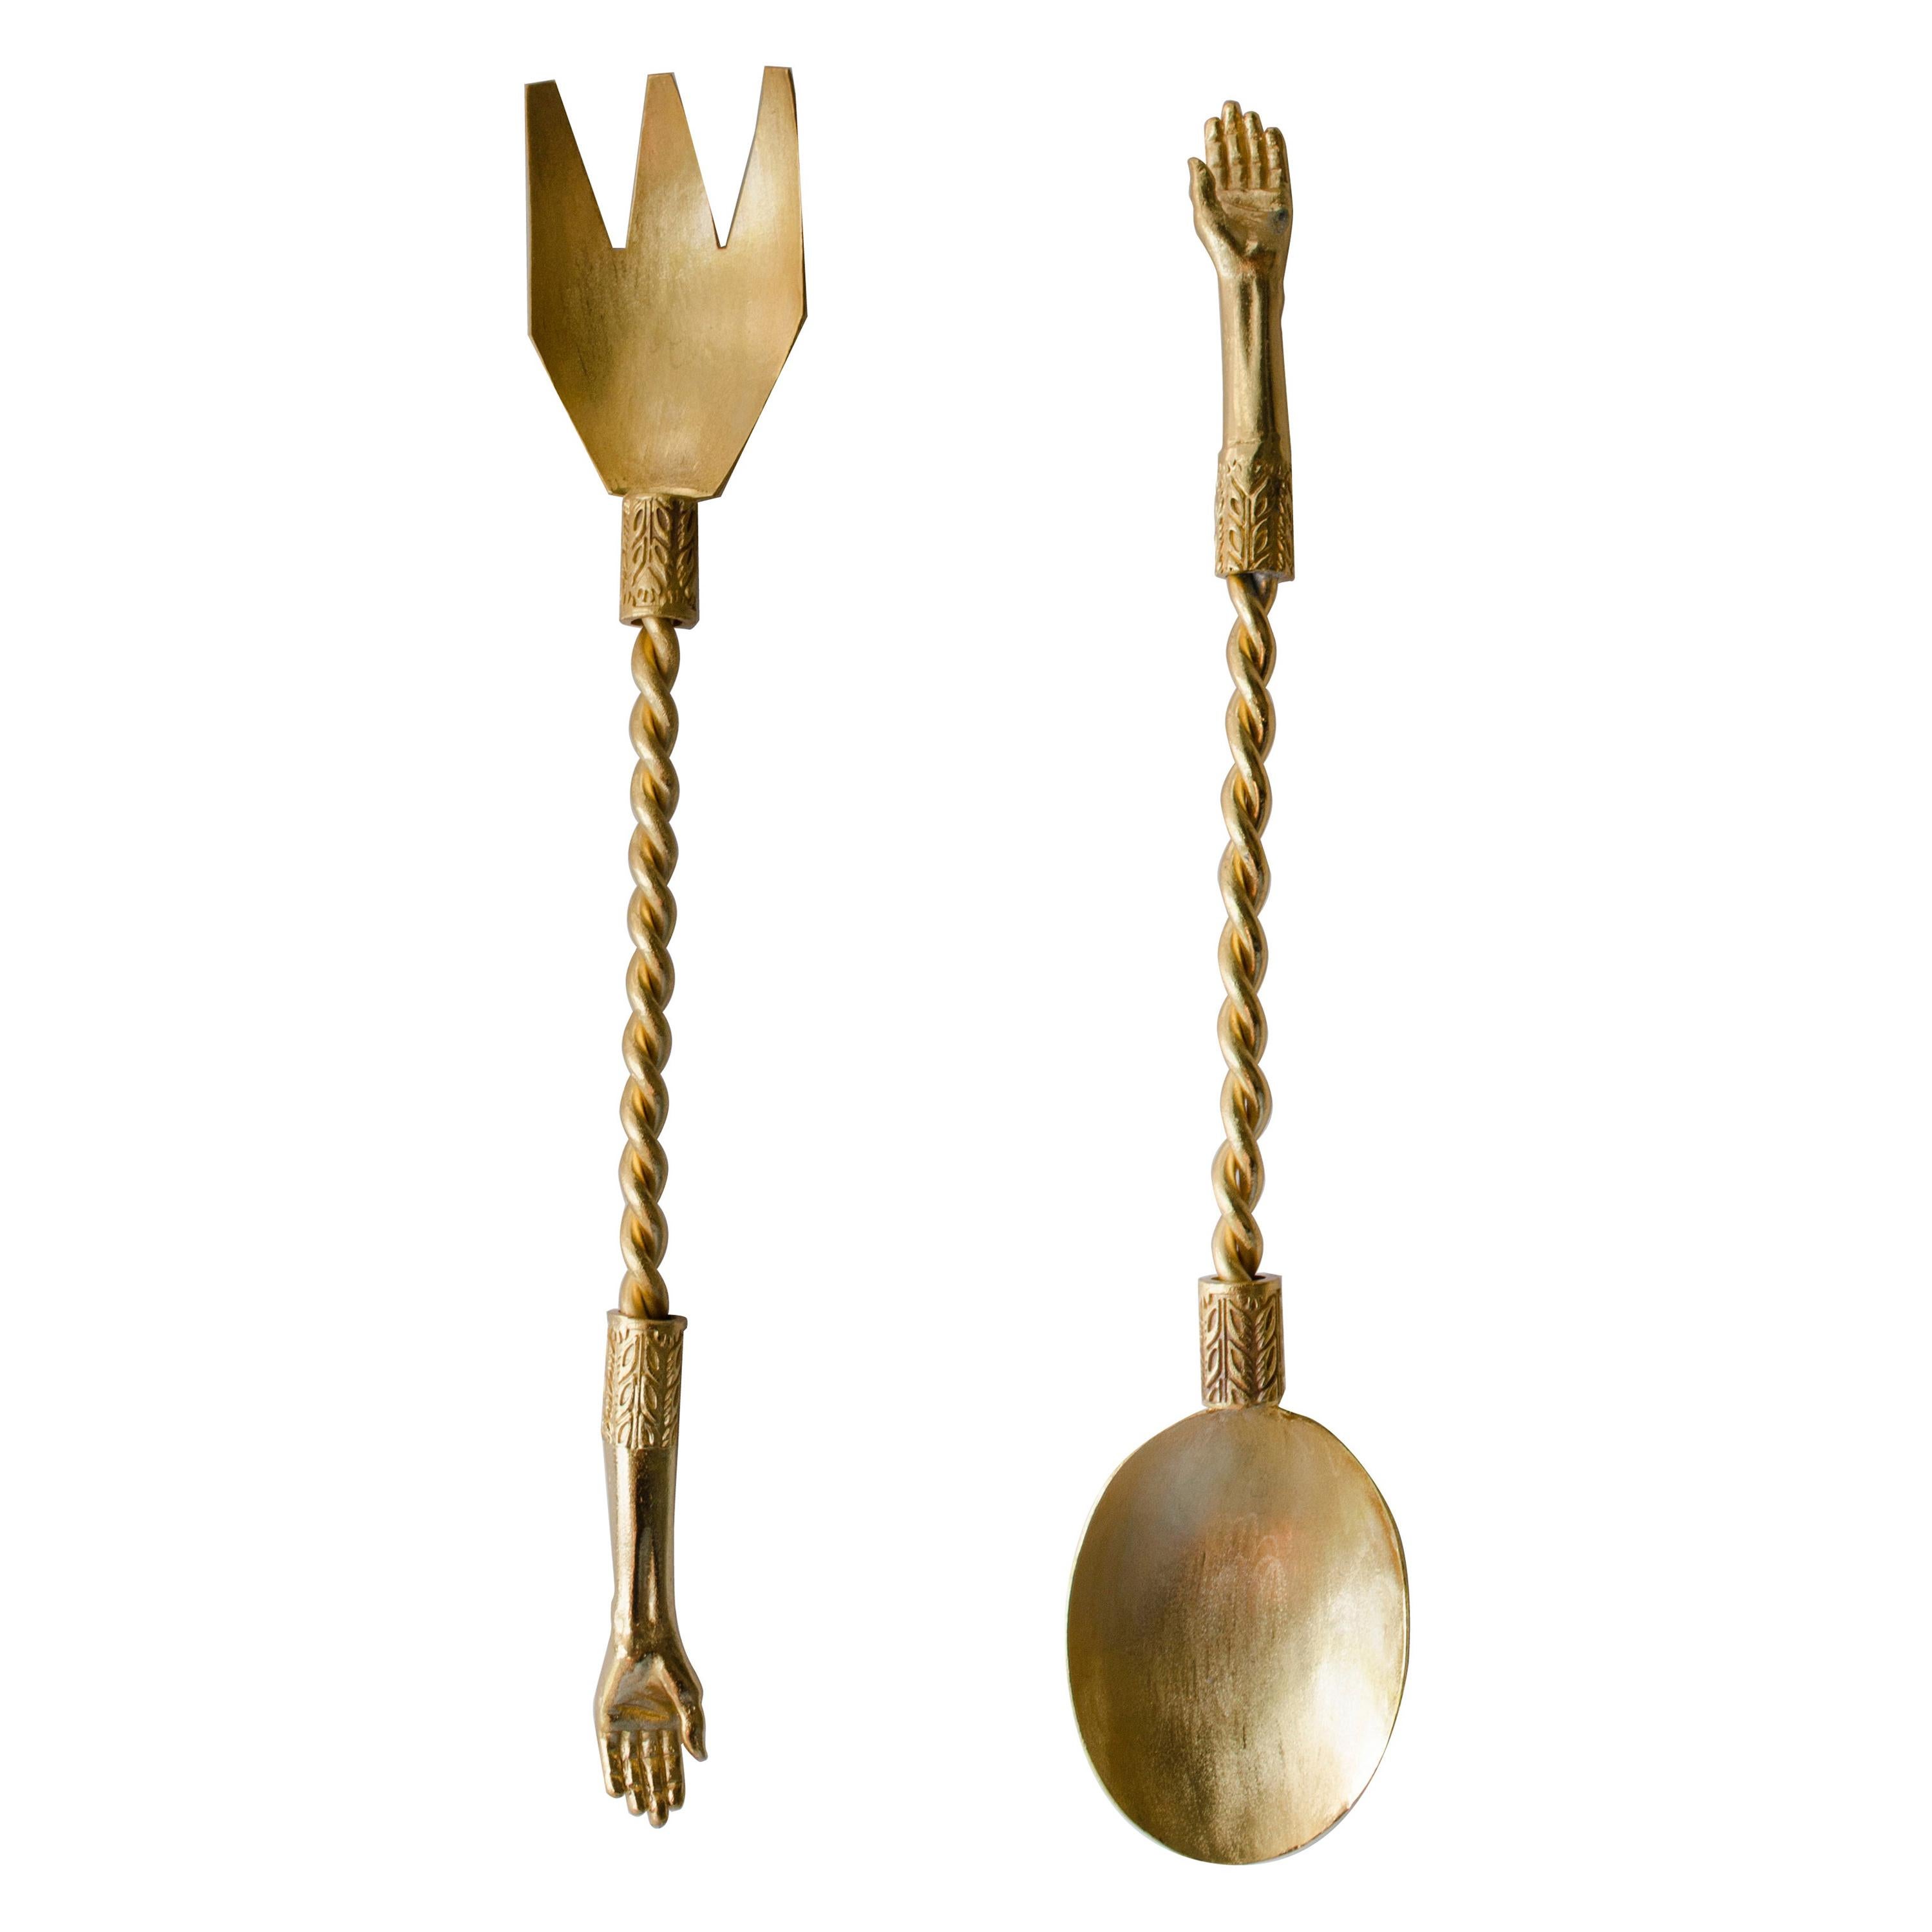 Contemporary Cutlery Servers Golden Plated Handcrafted Italy by Natalia Criado